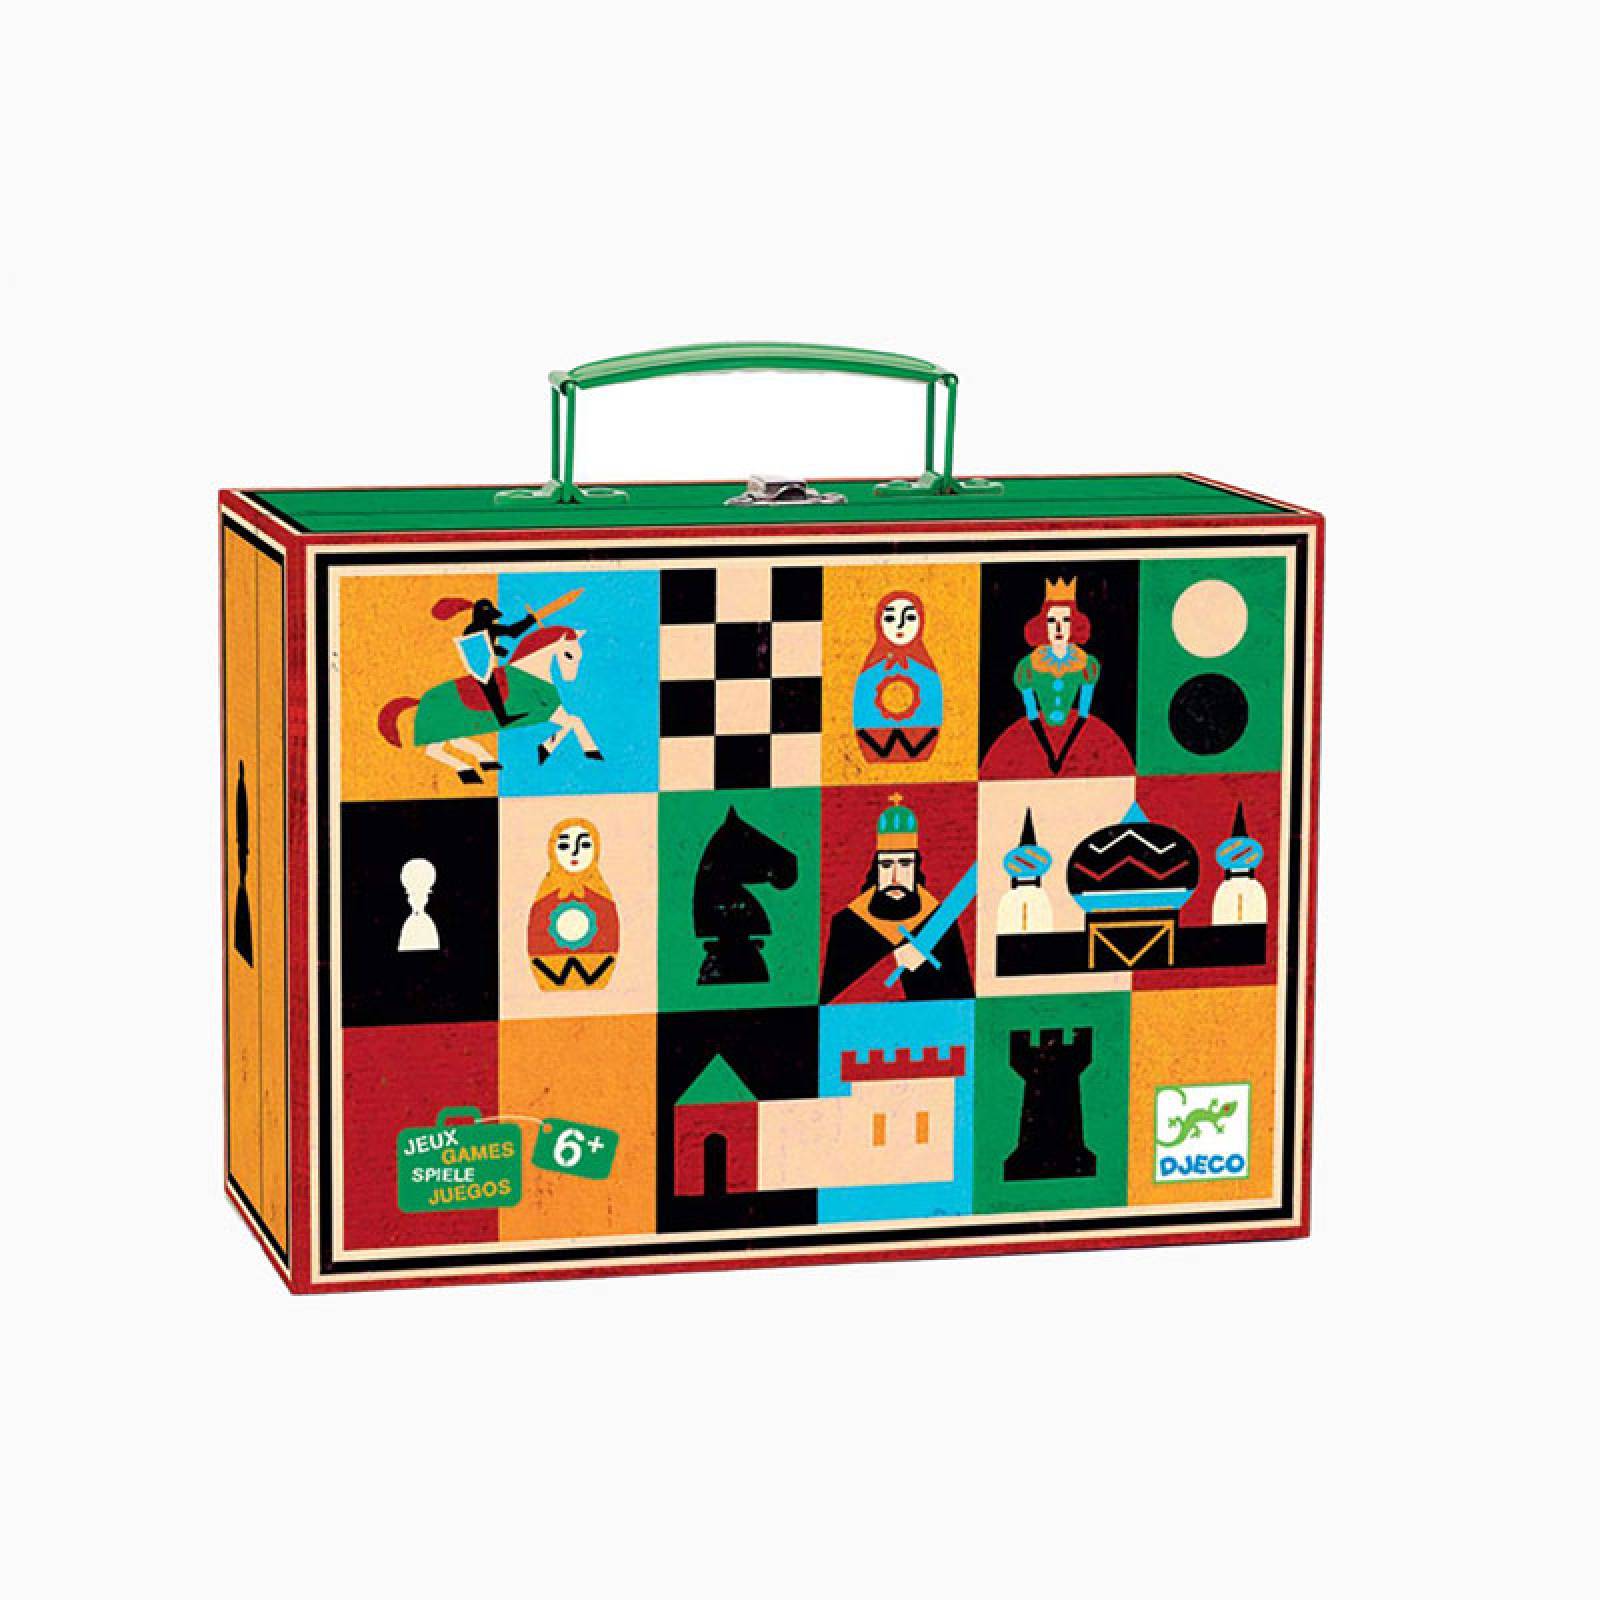 Chess And Draughts Game In Suitcase By Djeco thumbnails